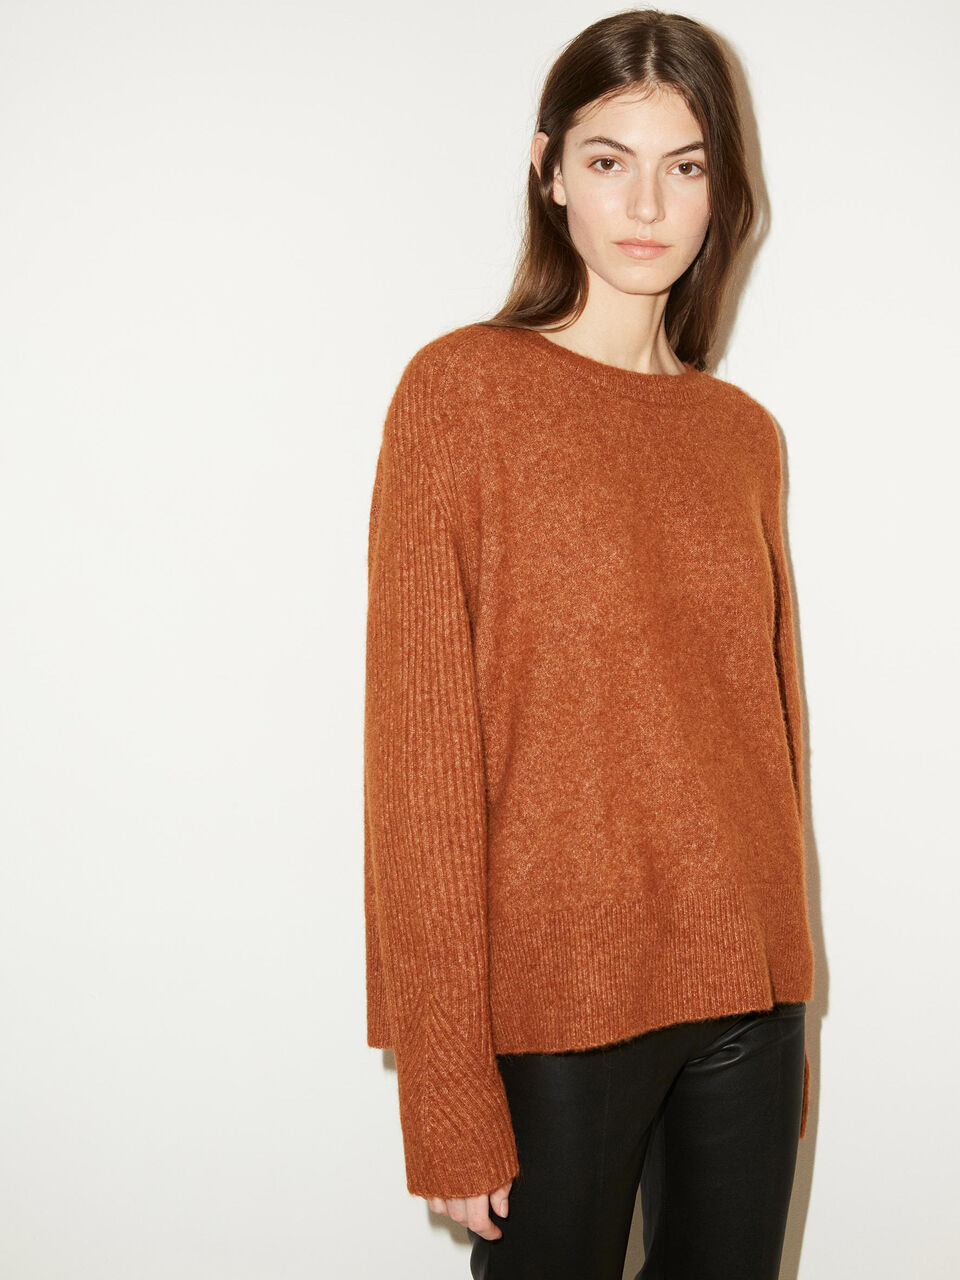 Ana sweater - Buy Clothing online